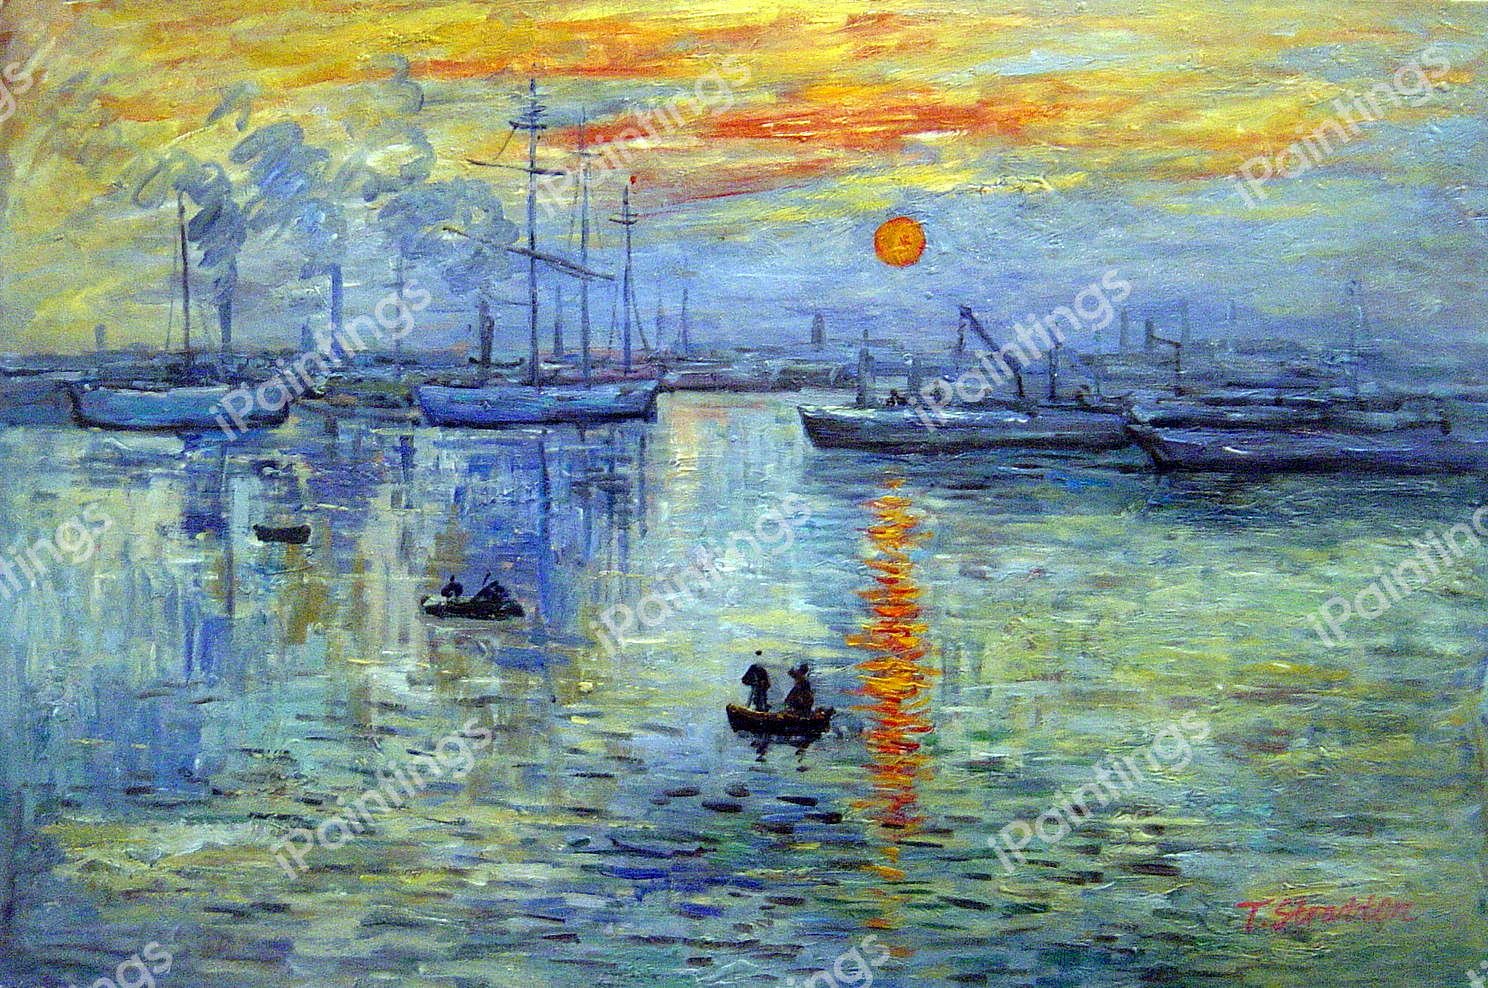 Impression Sunrise Painting by Claude Monet Reproduction